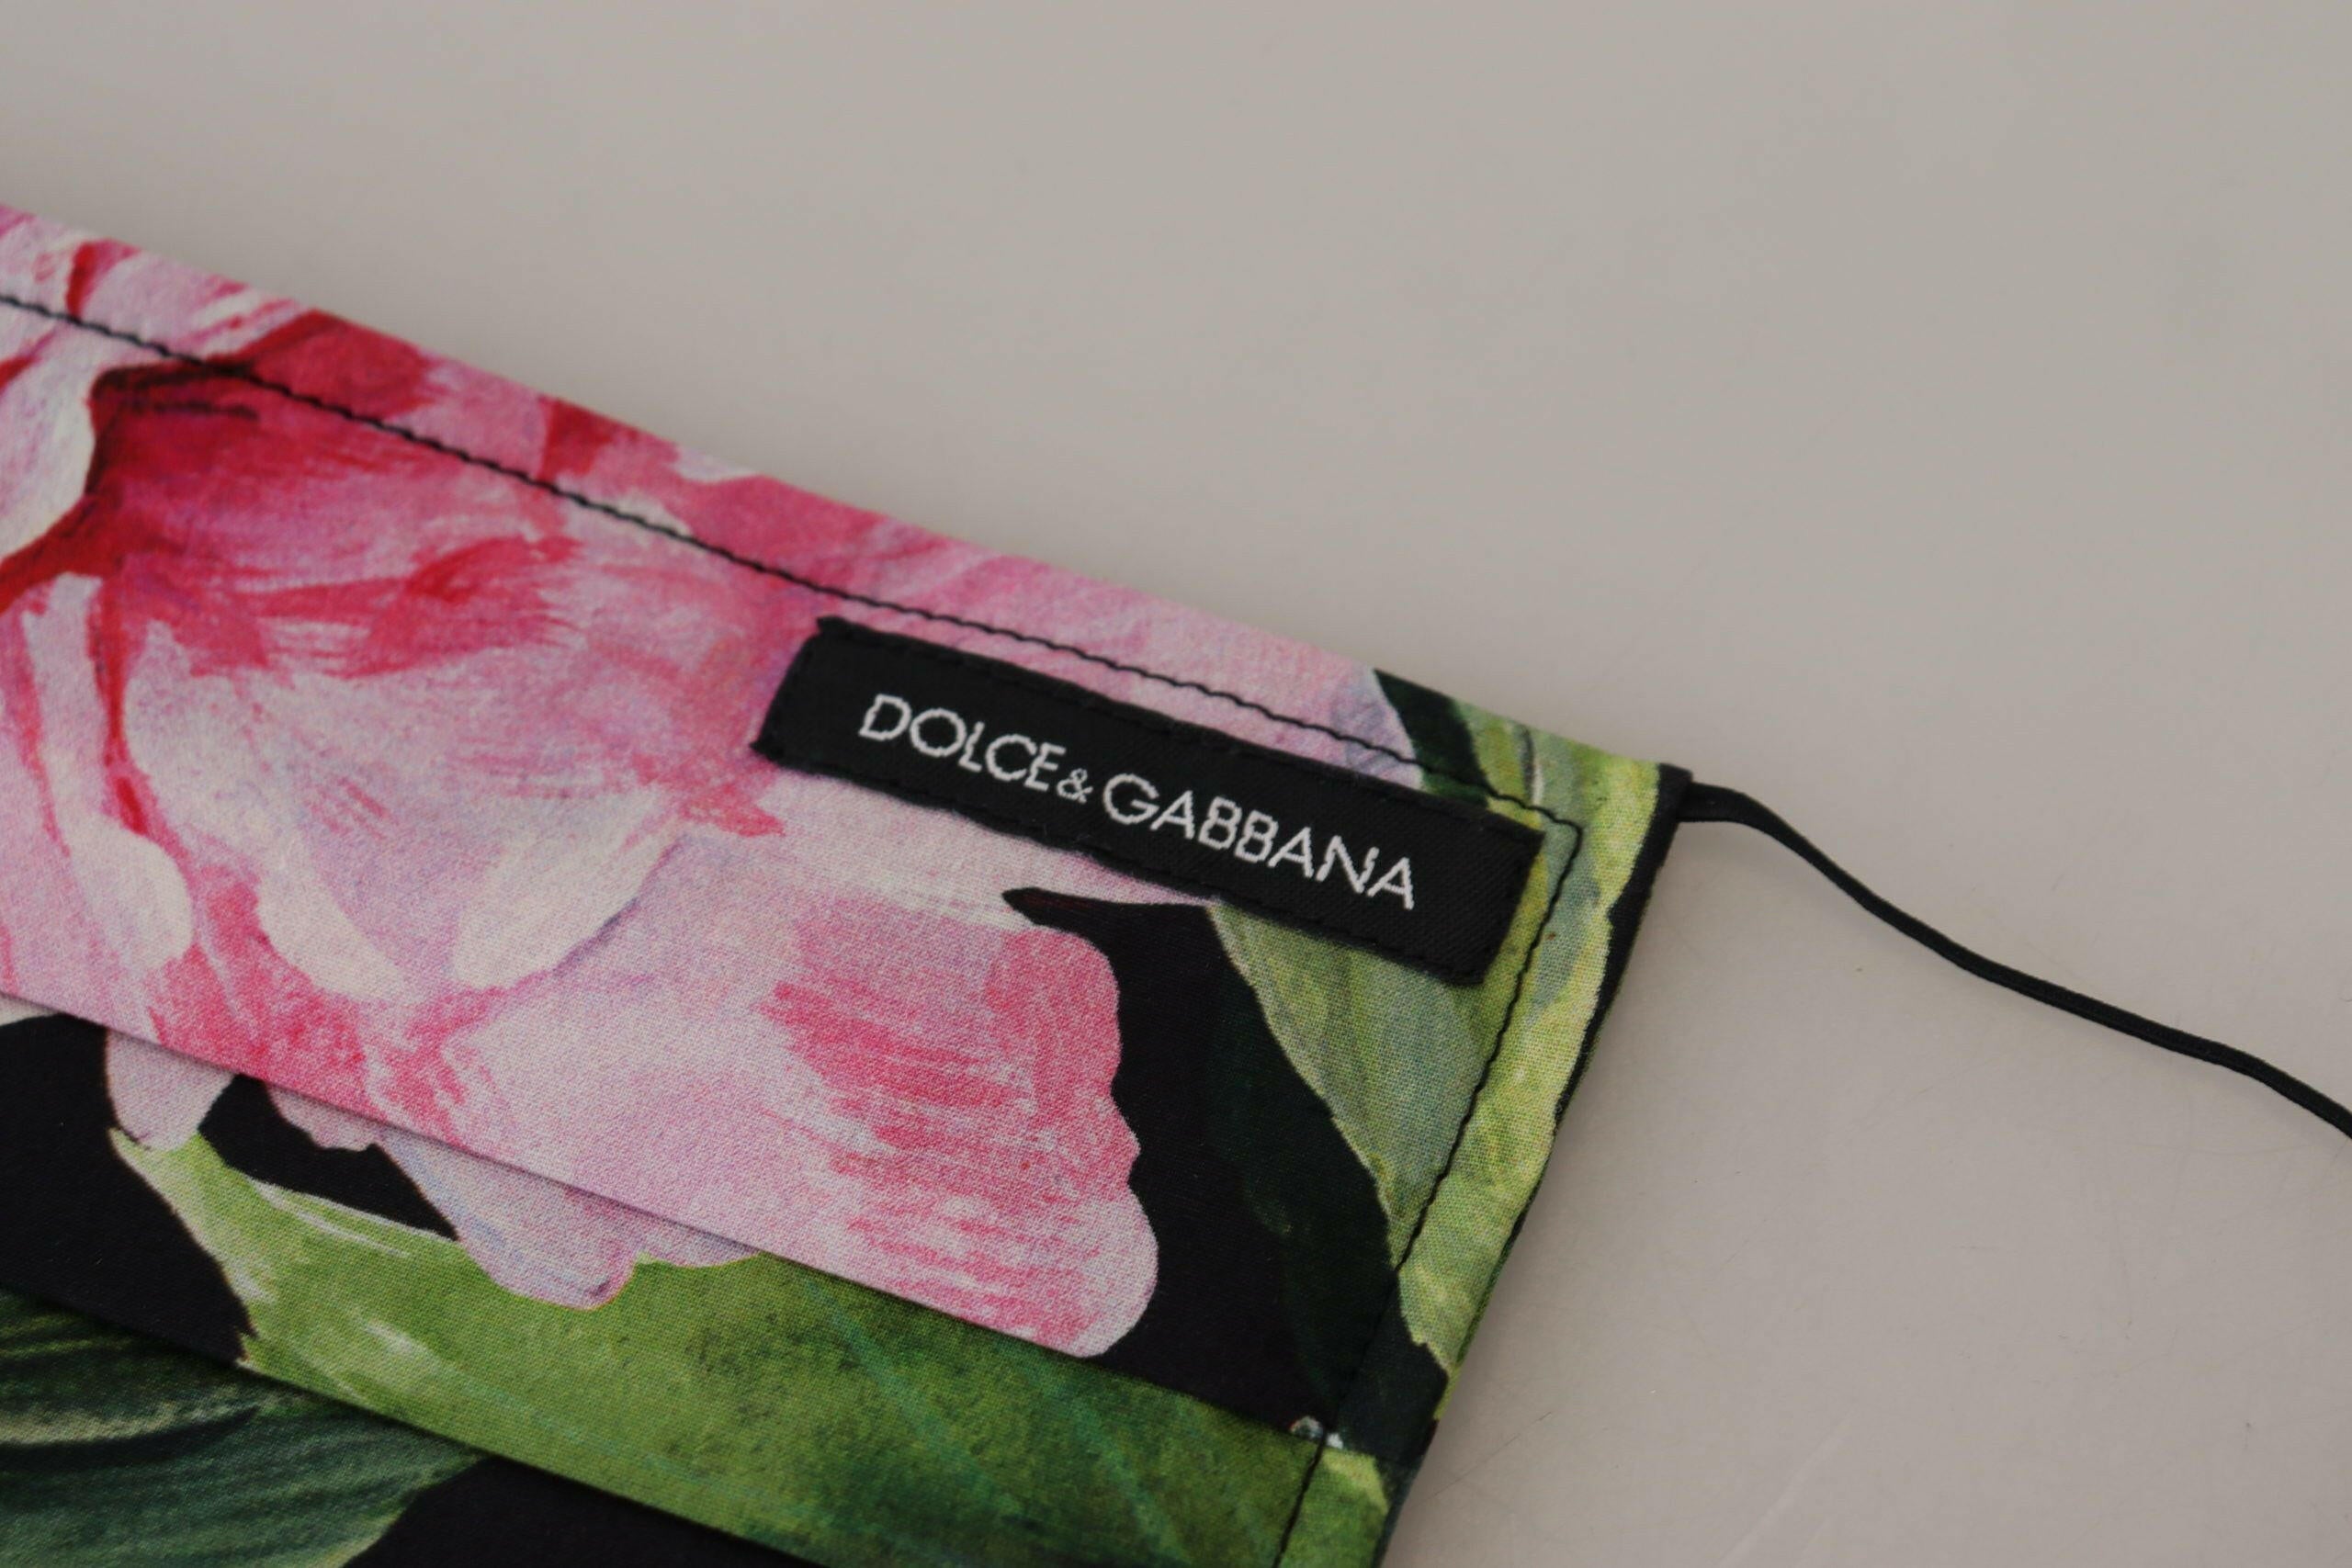 Dolce & Gabbana Black Floral Pleated Elastic Ear Strap Face Mask - GENUINE AUTHENTIC BRAND LLC  